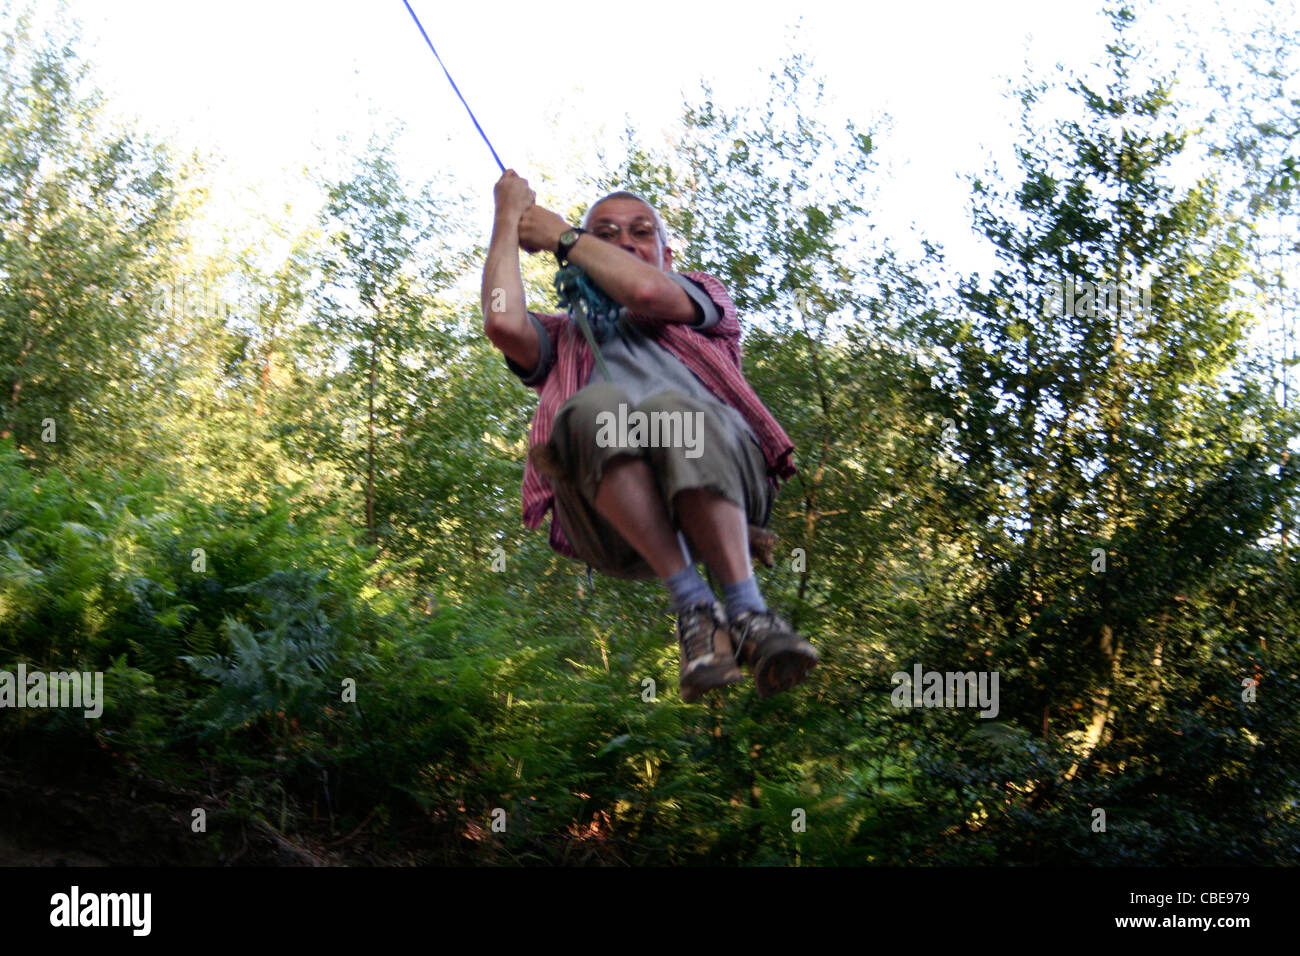 Man on a rope swing, Delamere Forest, Linmere, Cheshire, England, UK Stock Photo